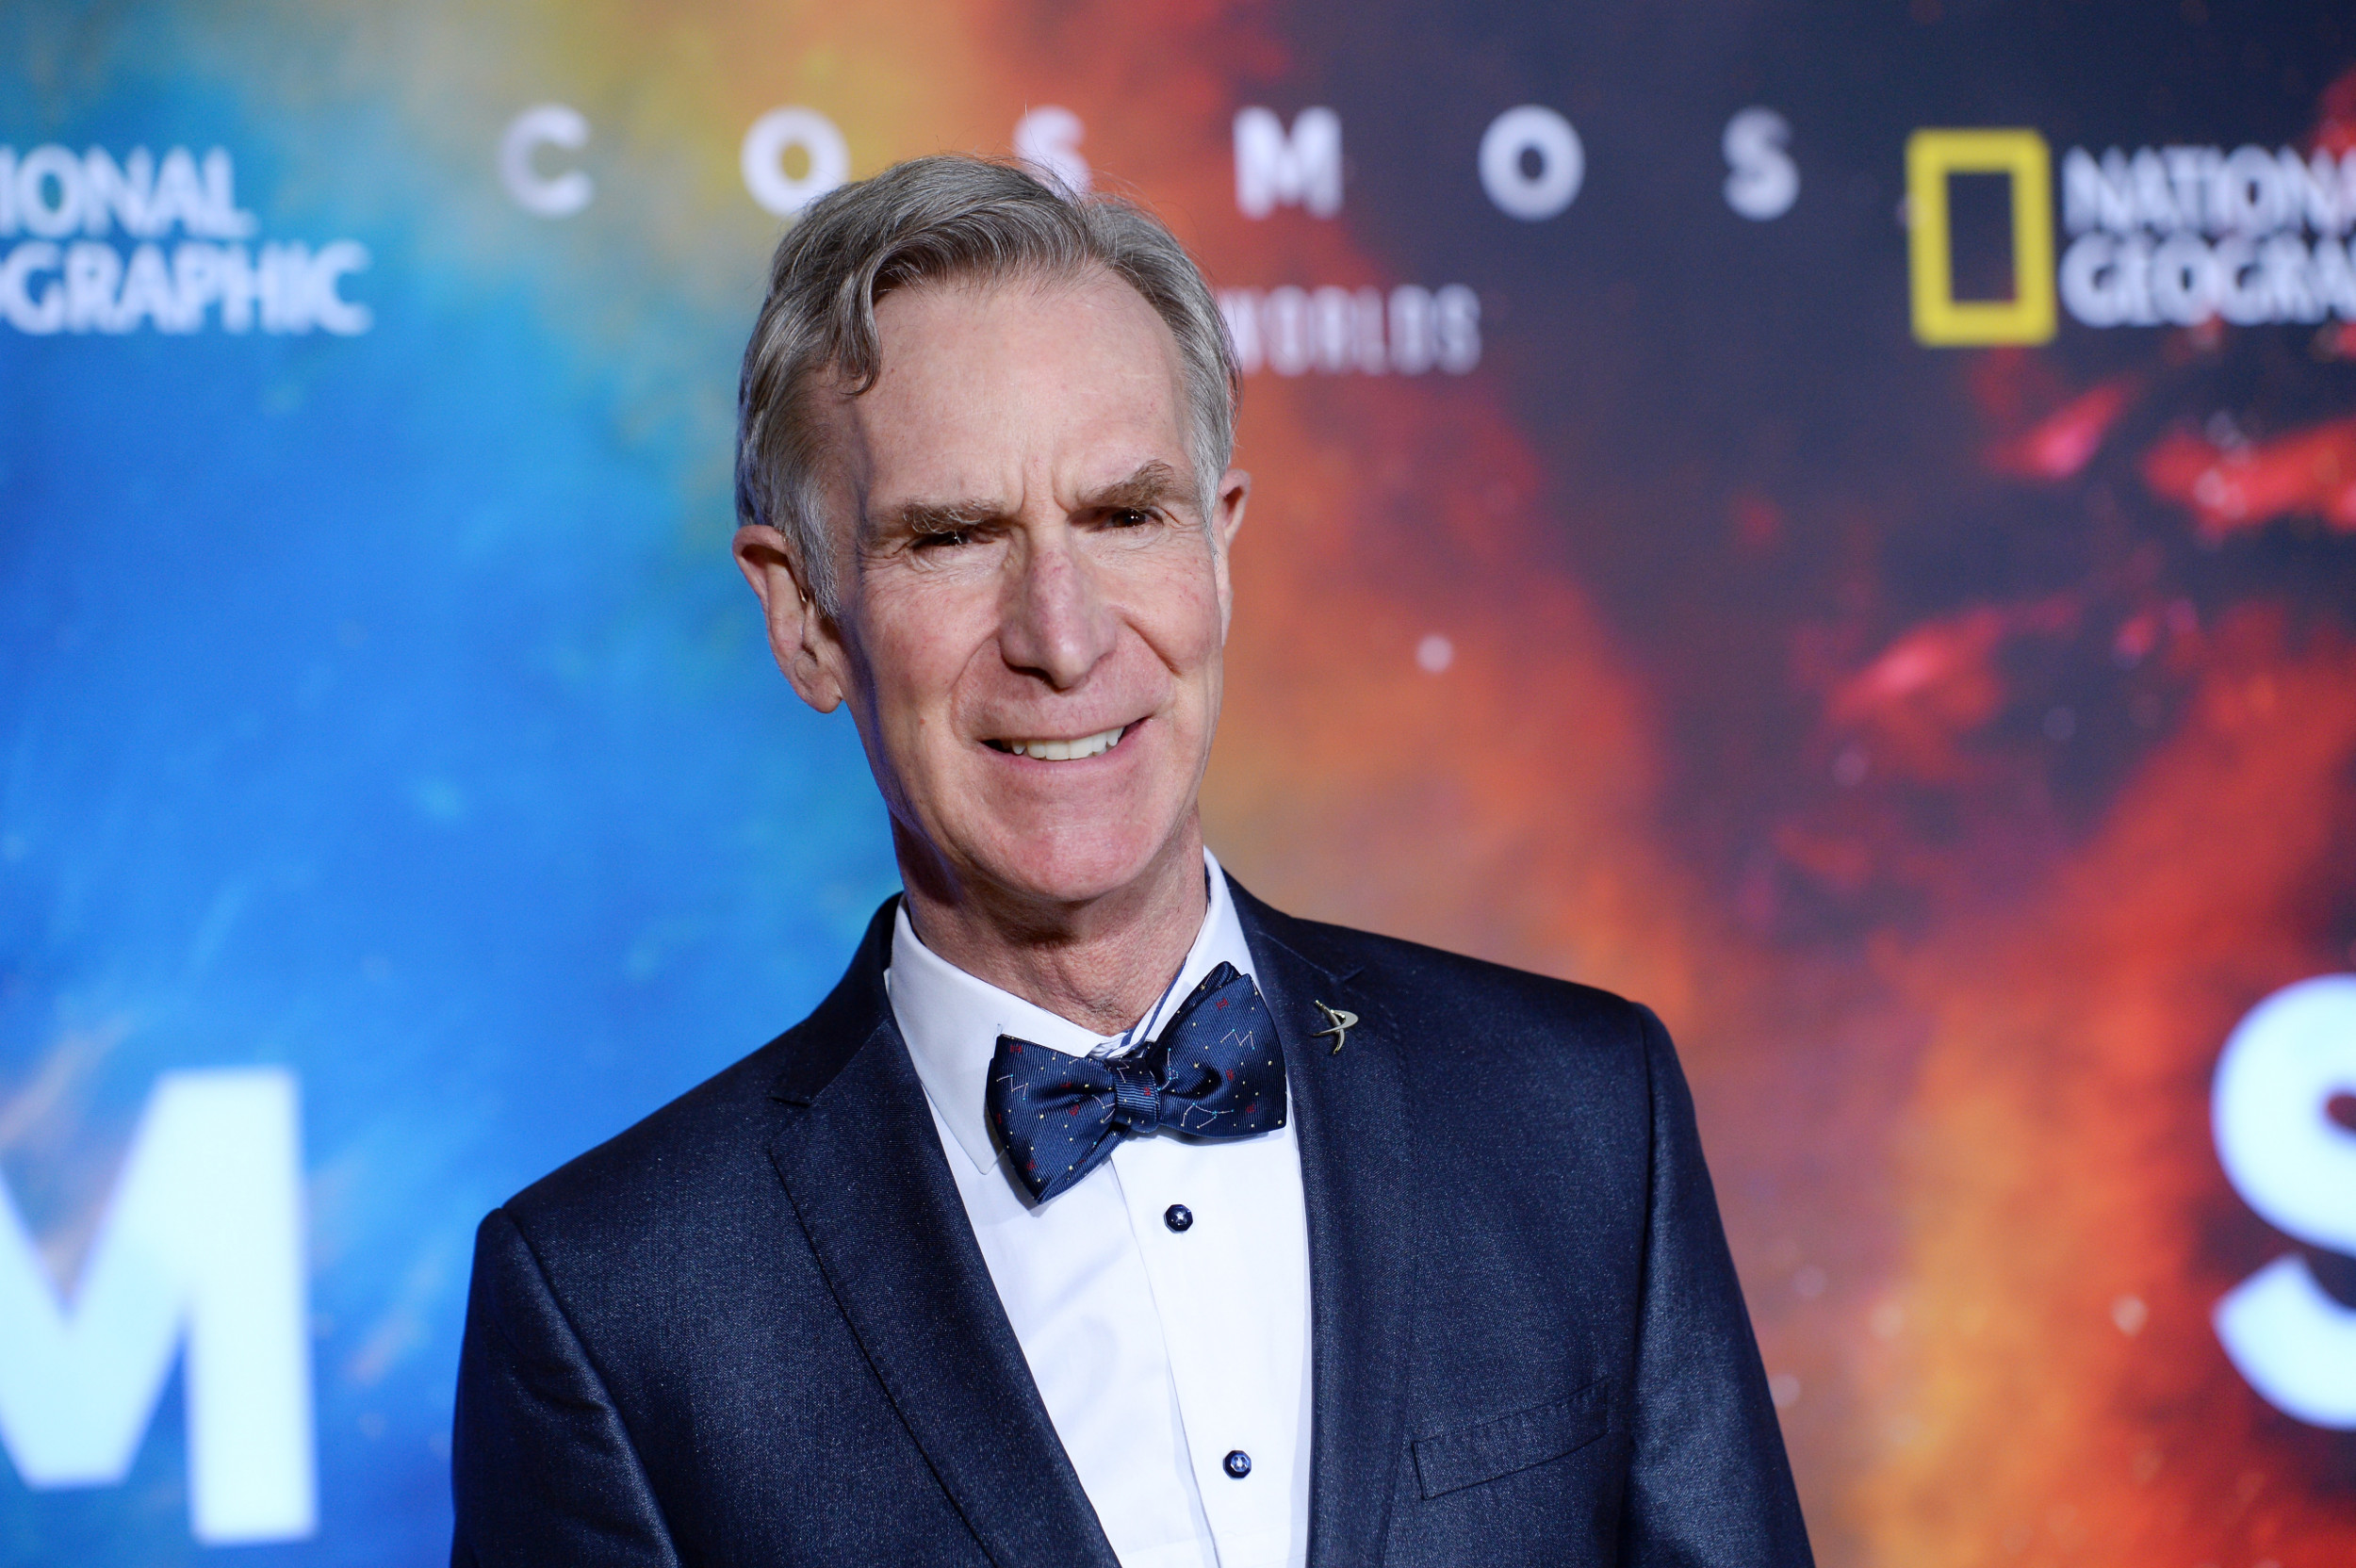 Bill Nye rips COVID anti-vaxxers, says becoming an incubator for variants i...